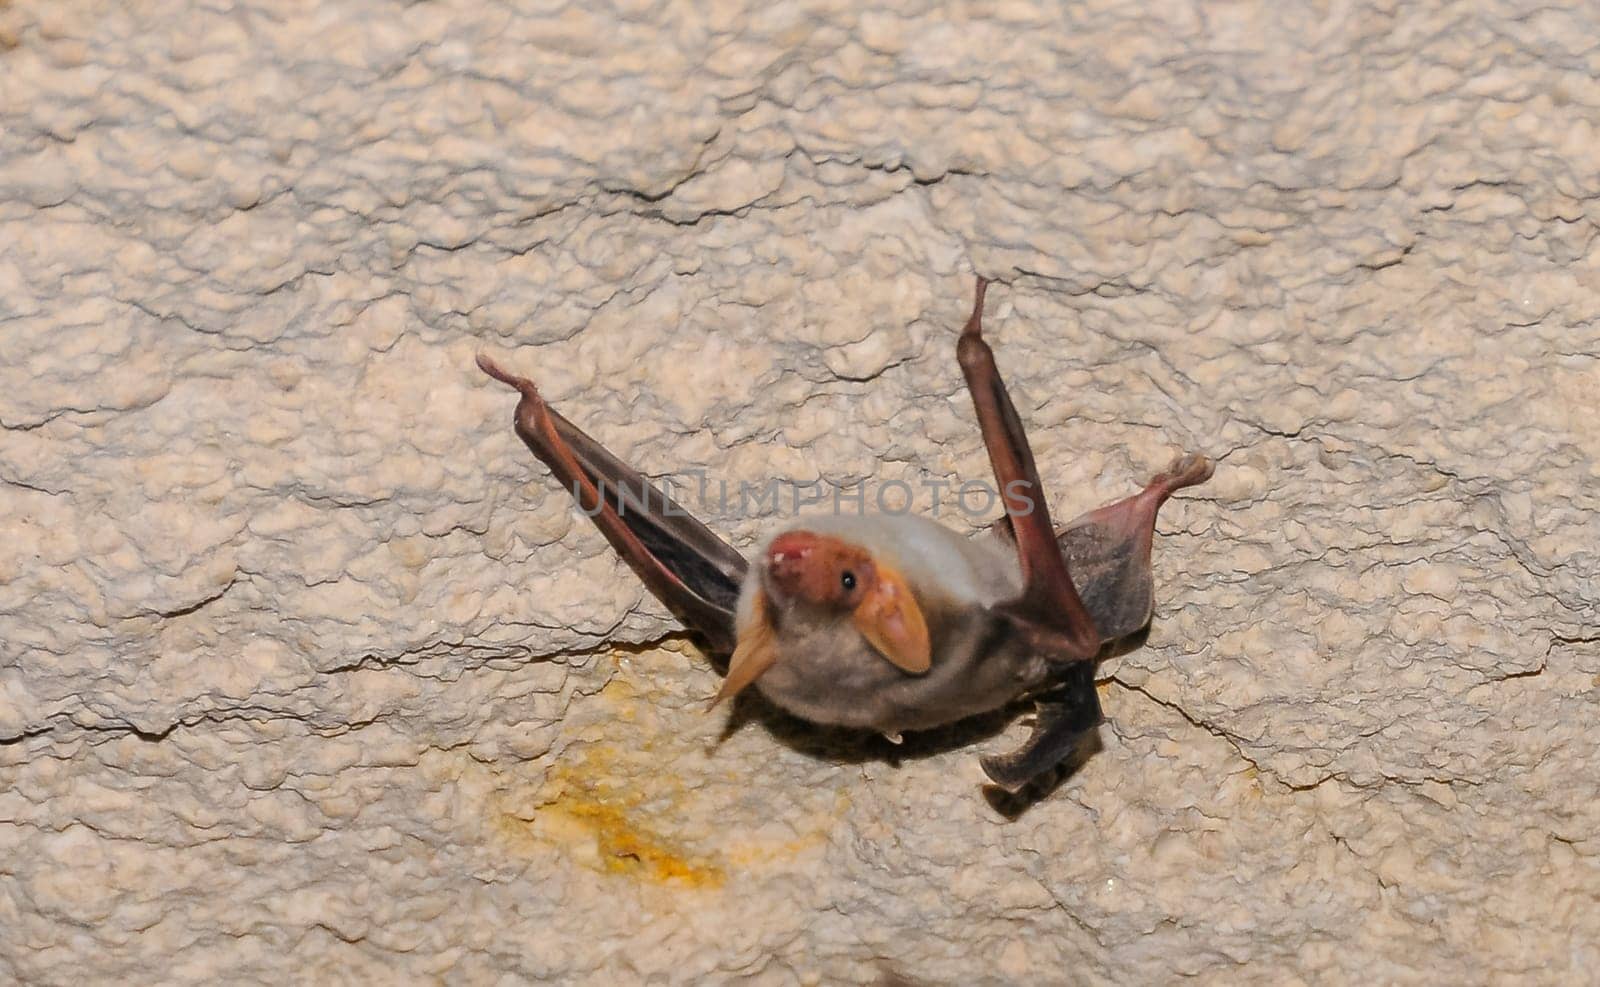 A bat rests upside down during the day in the catacombs of eastern Crimea